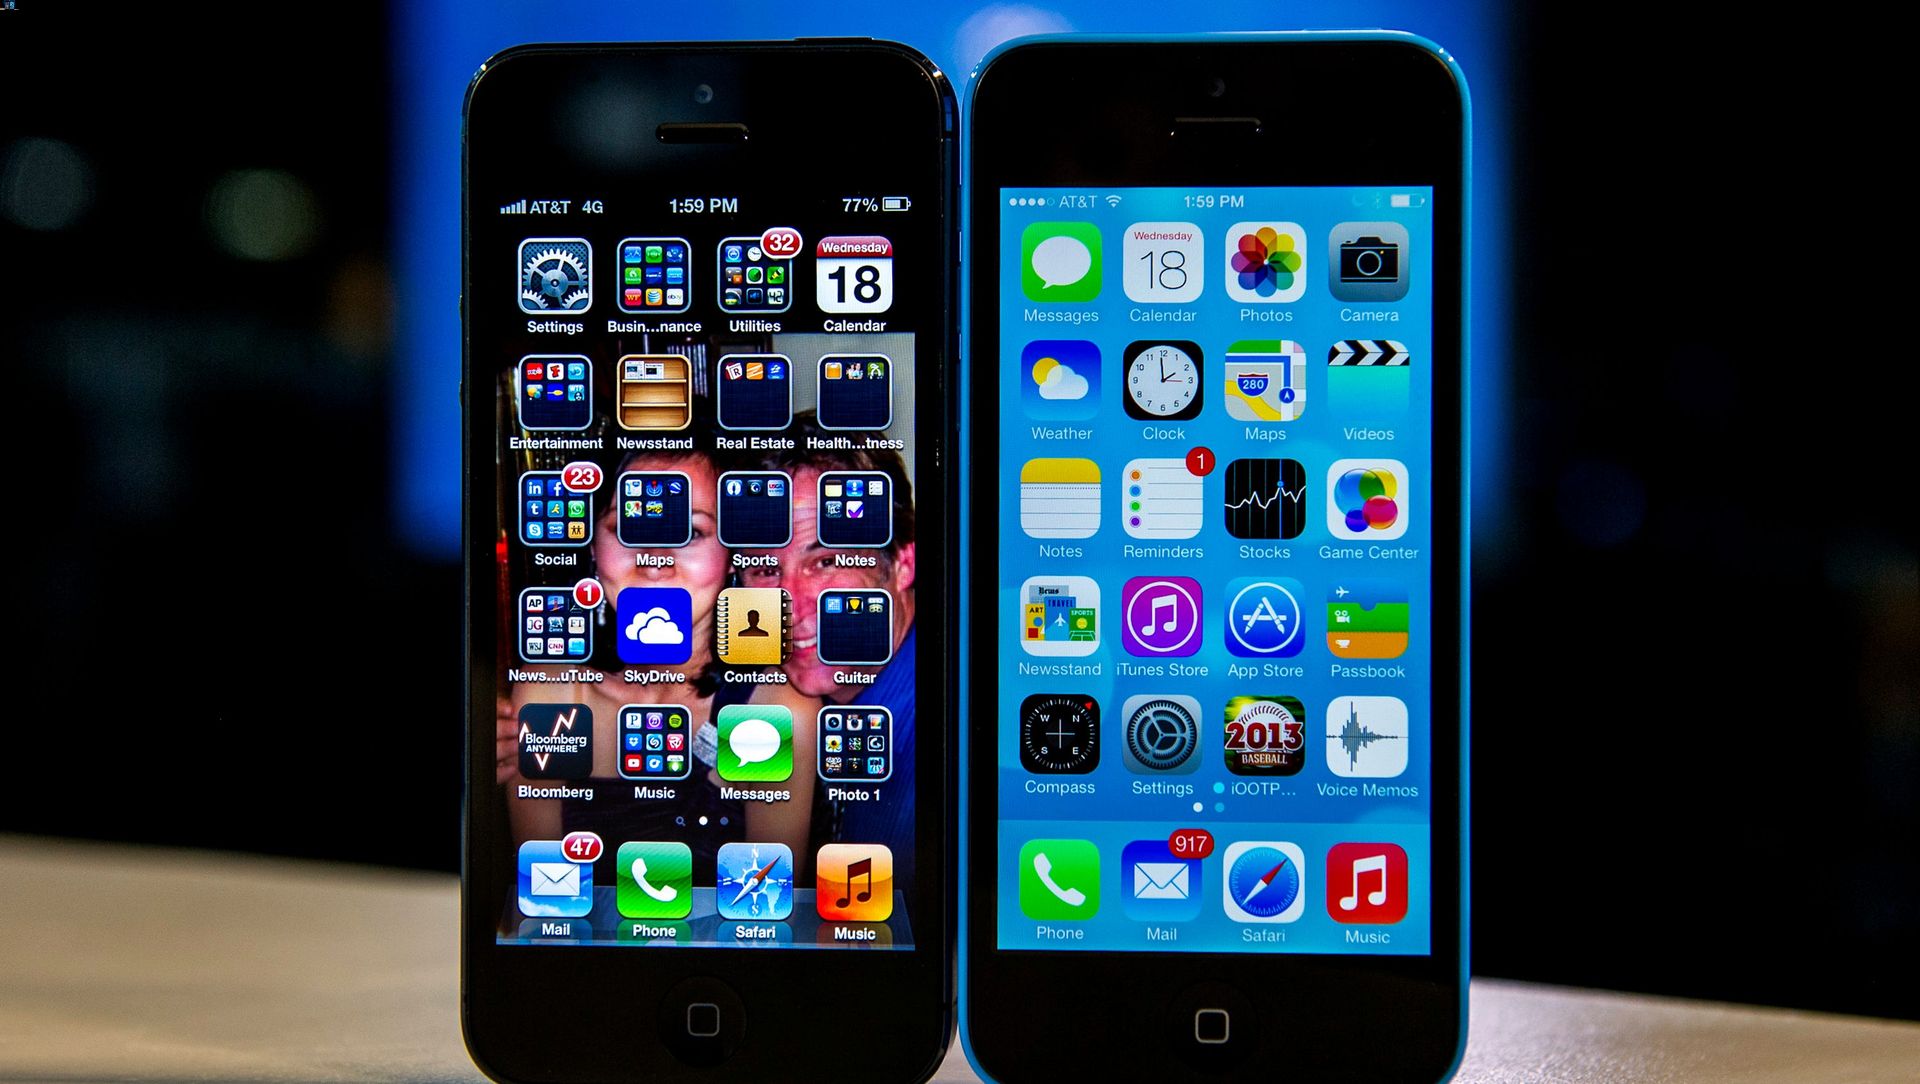 ios-7s-design-changes-will-help-iphone-compete-against-android